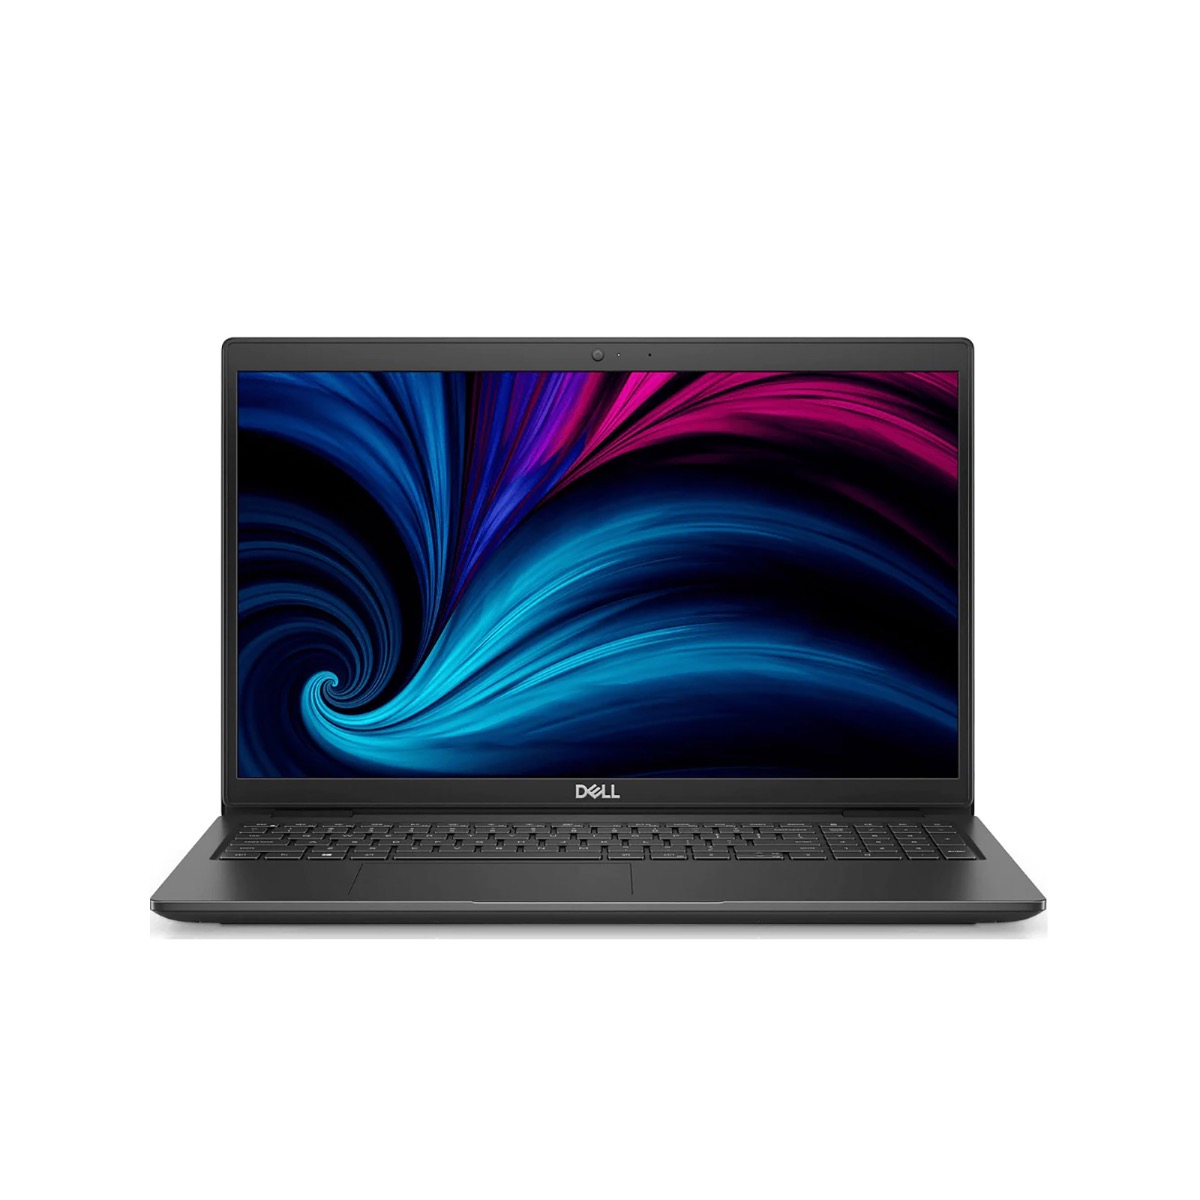 Dell-N065L352015EMEA-Dell-N065L352015EMEA-N065L352015EMEA-Laptops | LaptopSA.co.za a division of the notebook company 